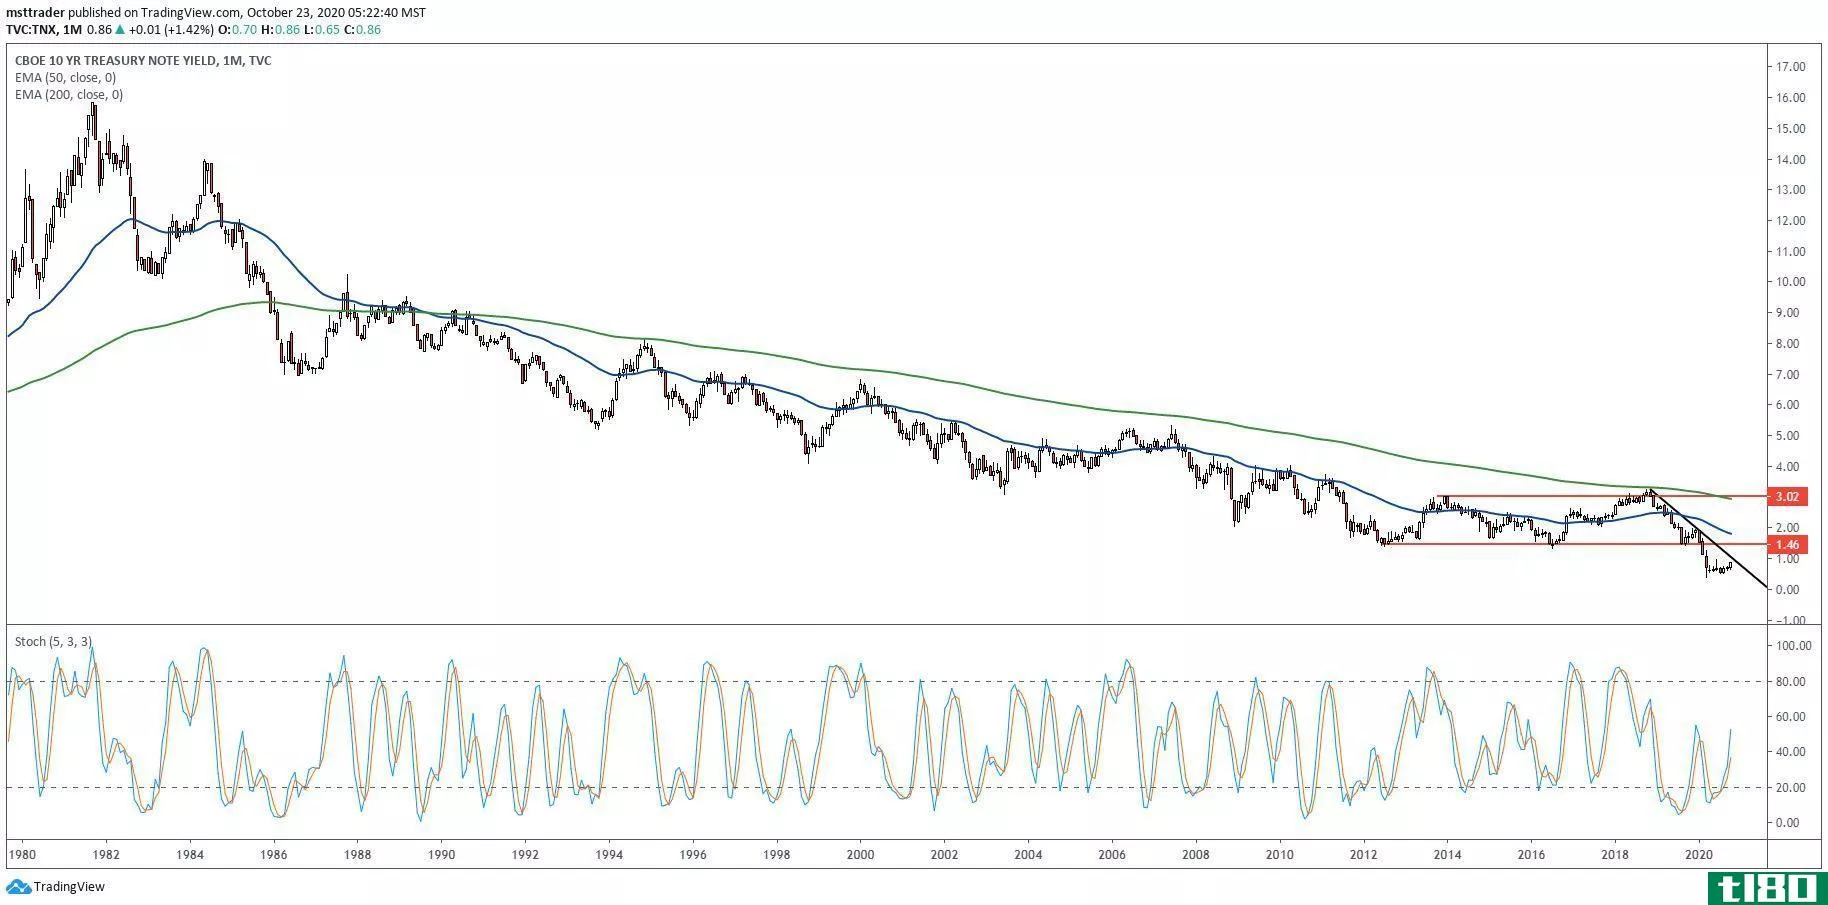 Chart showing the performance of the CBOE 10 Year Treasury Note Yield (TNX)